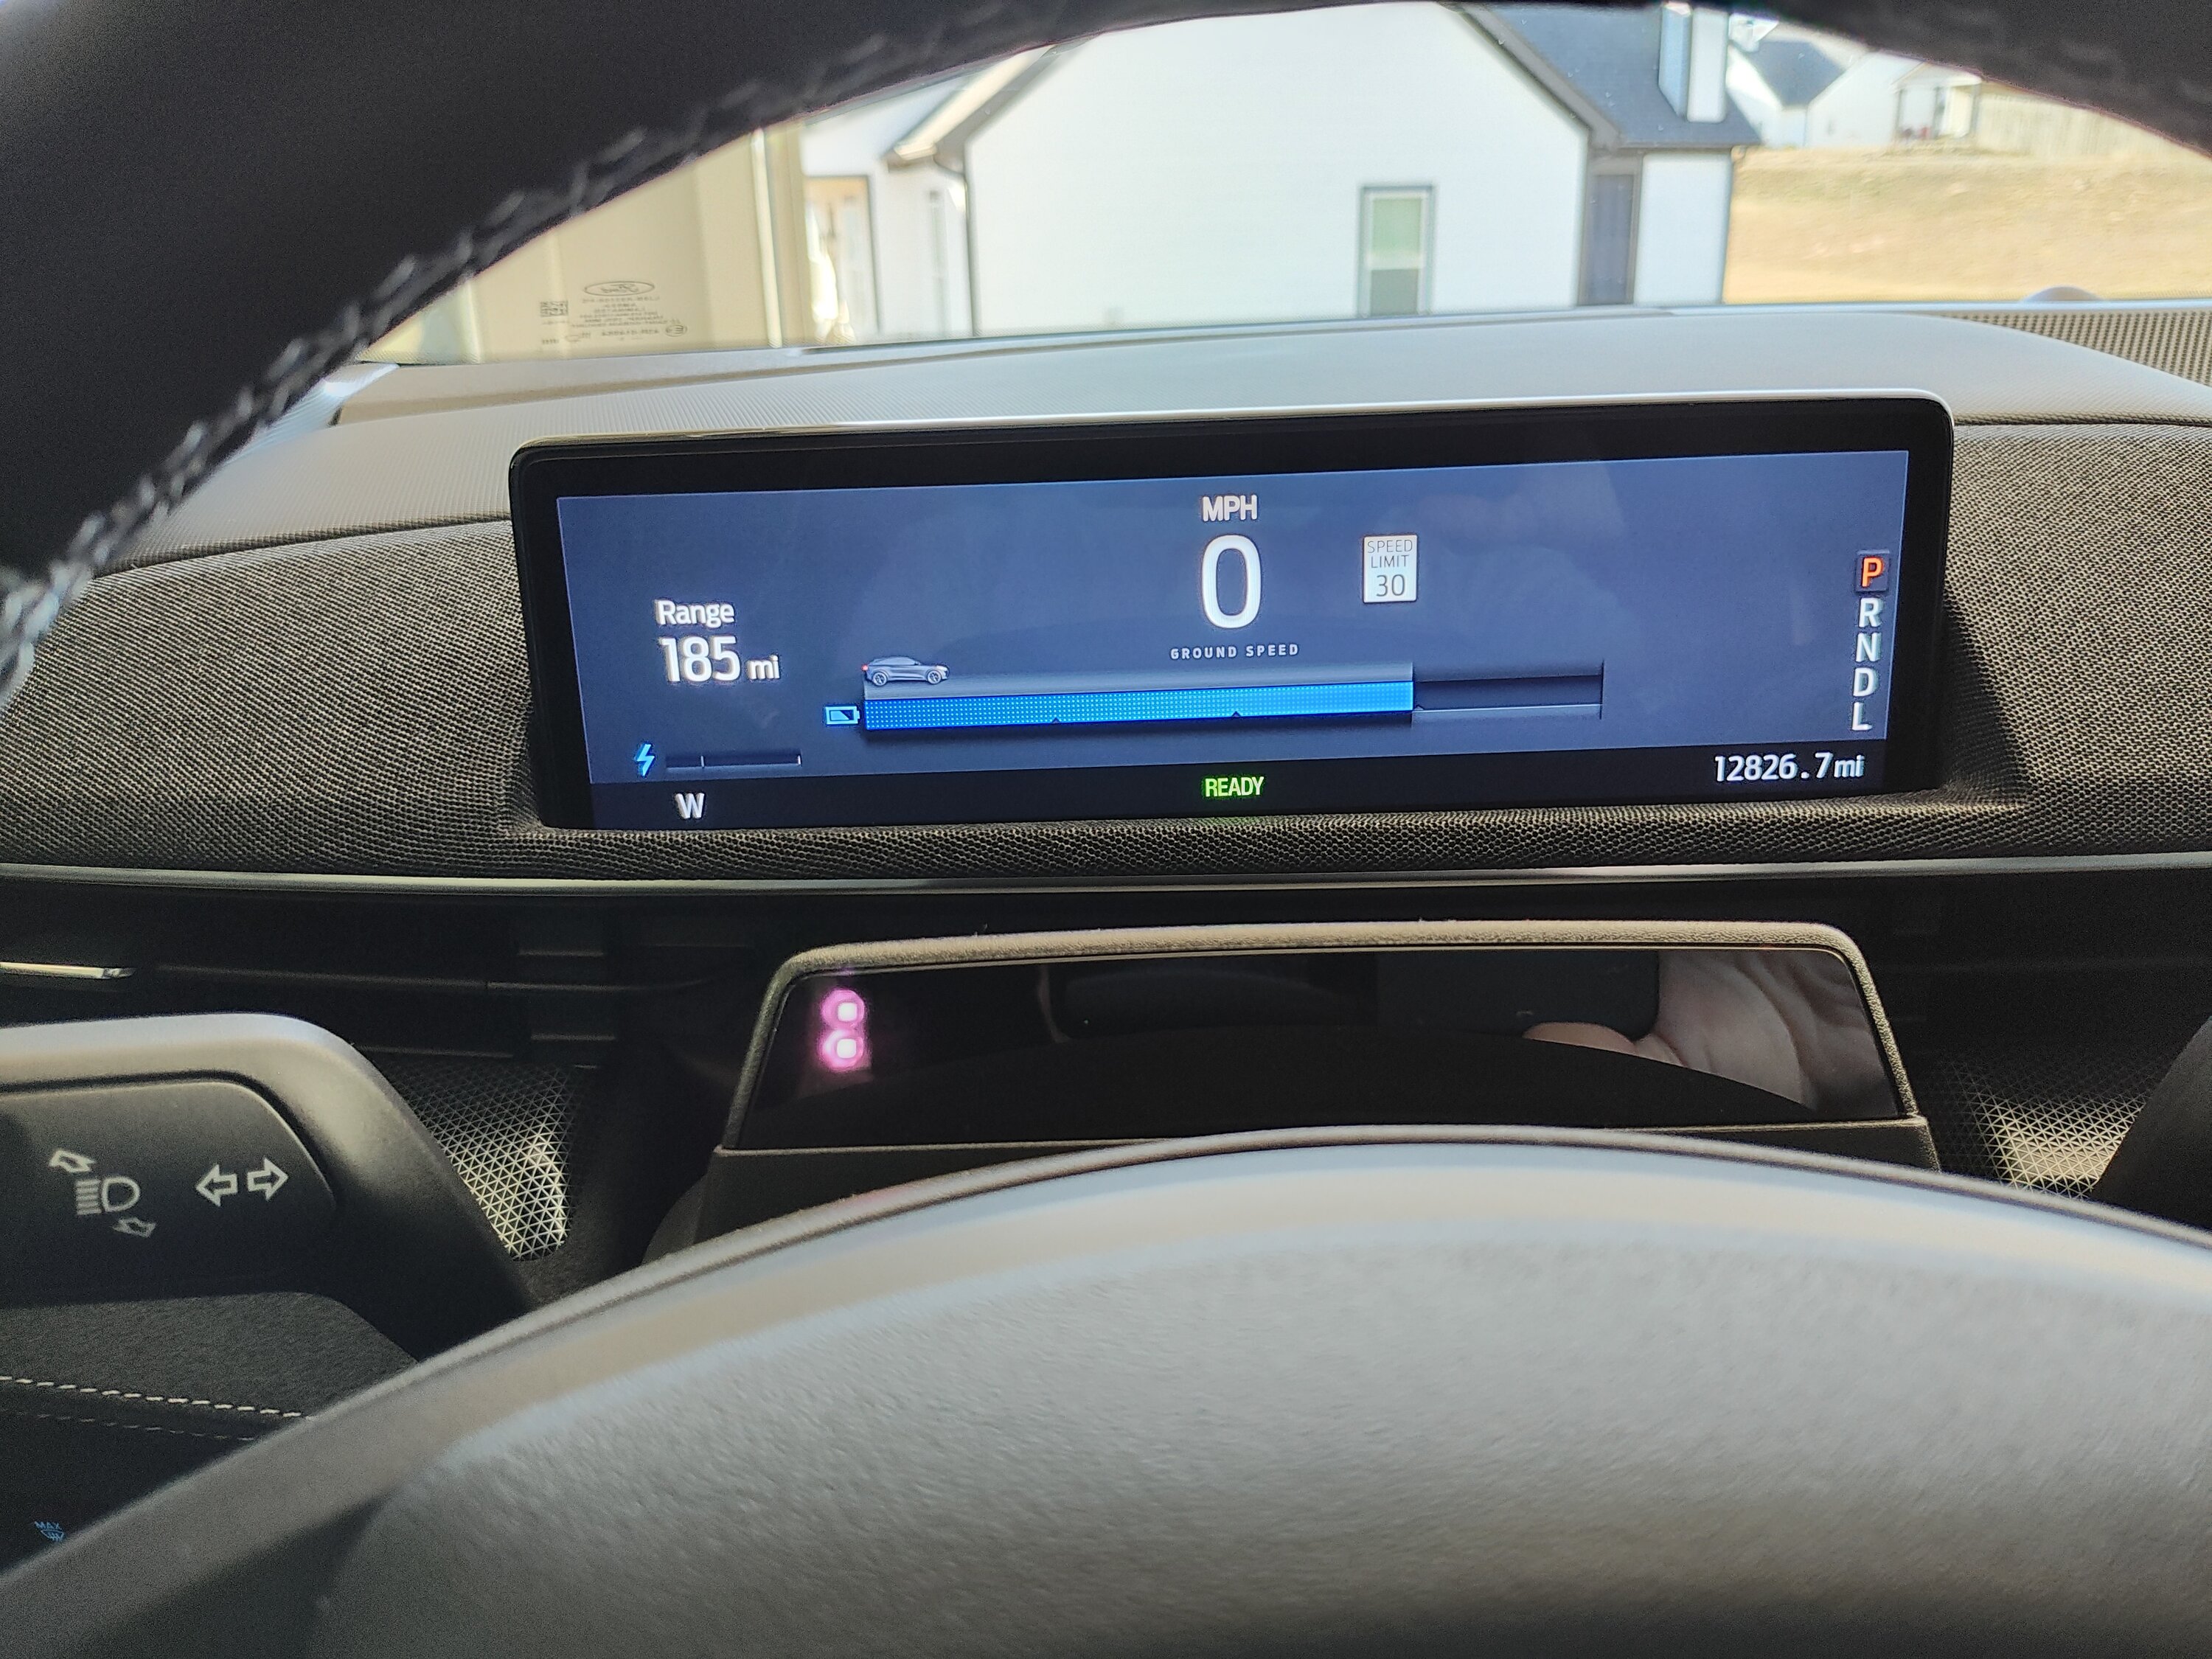 S650 Mustang Over The Air Updates - OTA Dash Display